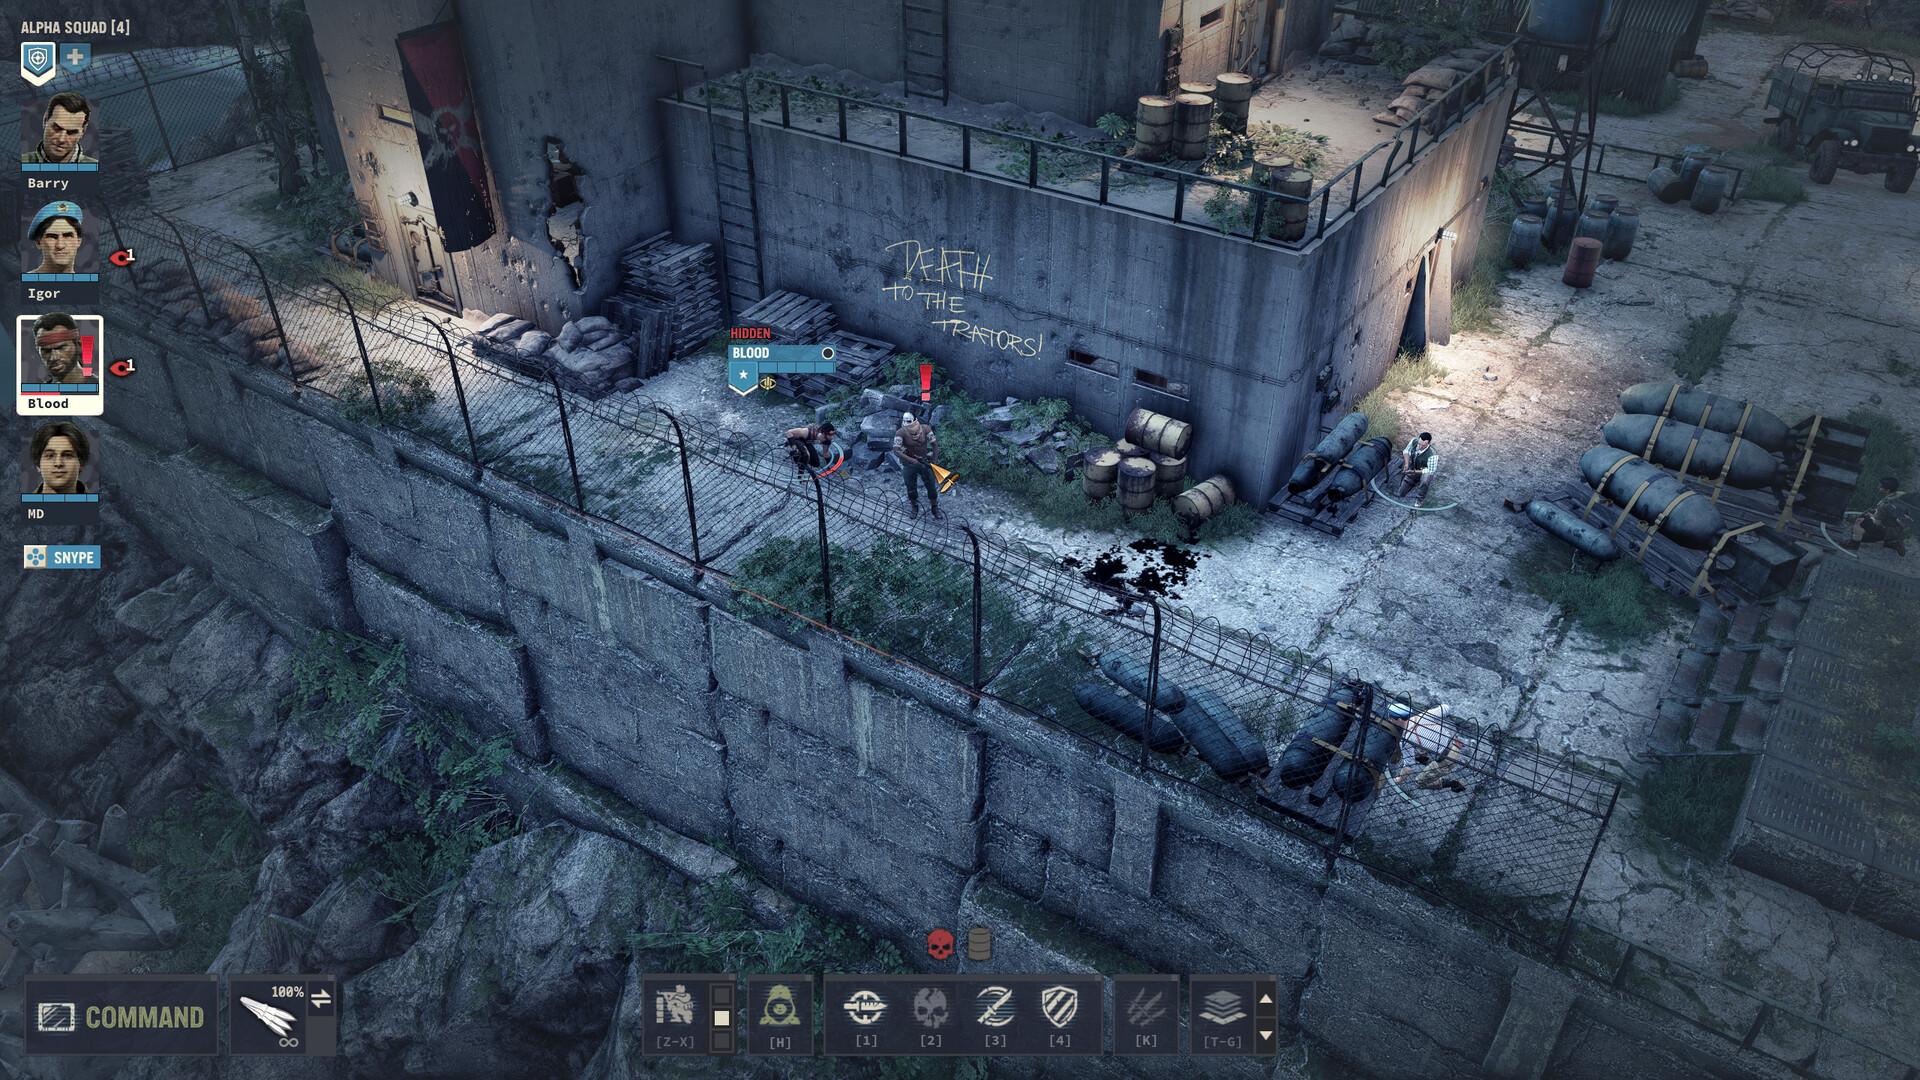 Screenshot №6 from game Jagged Alliance 3